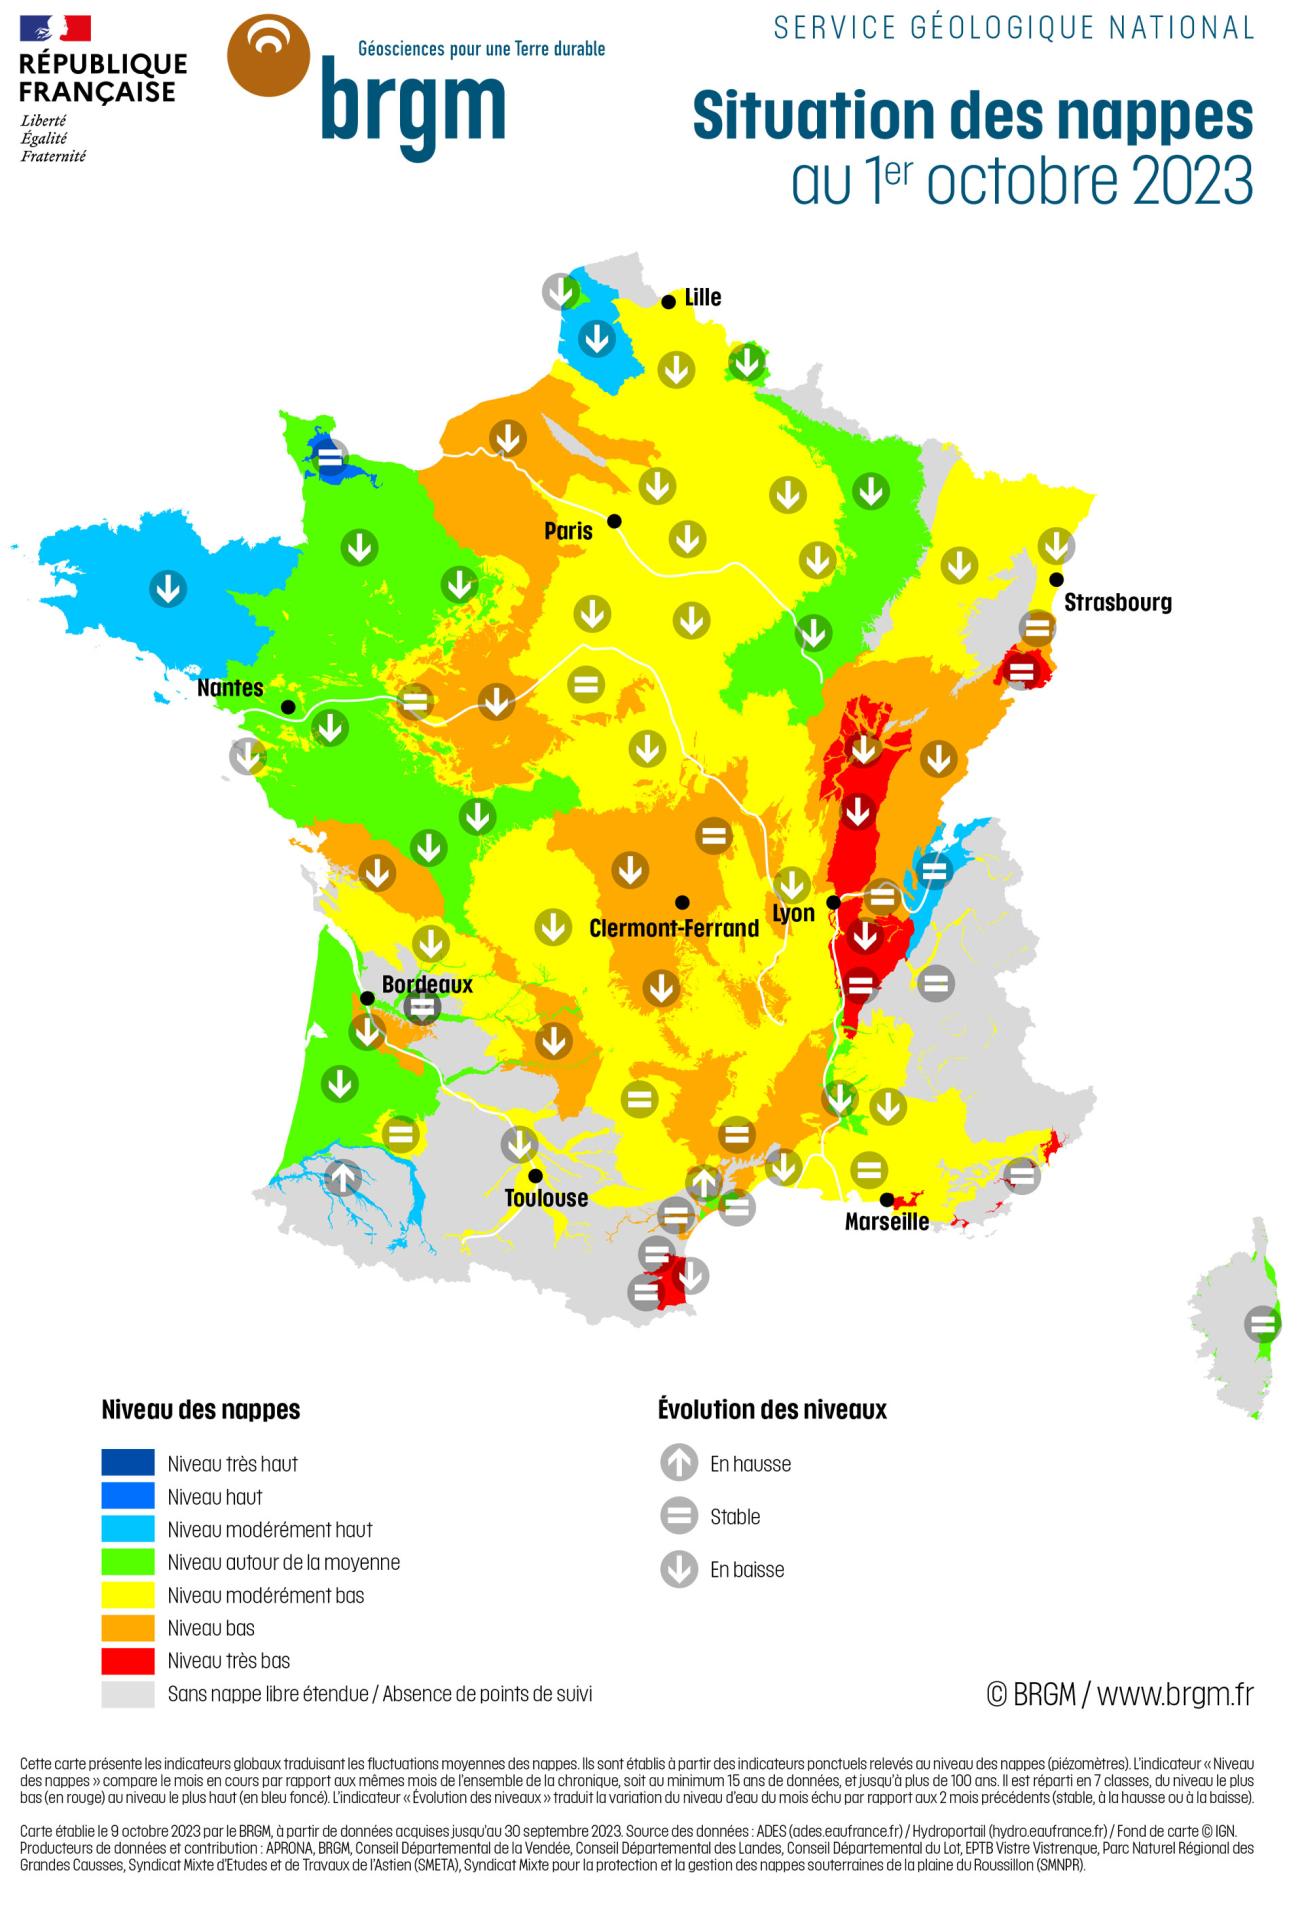 Map of aquifer levels in mainland France on 1 October 2023.